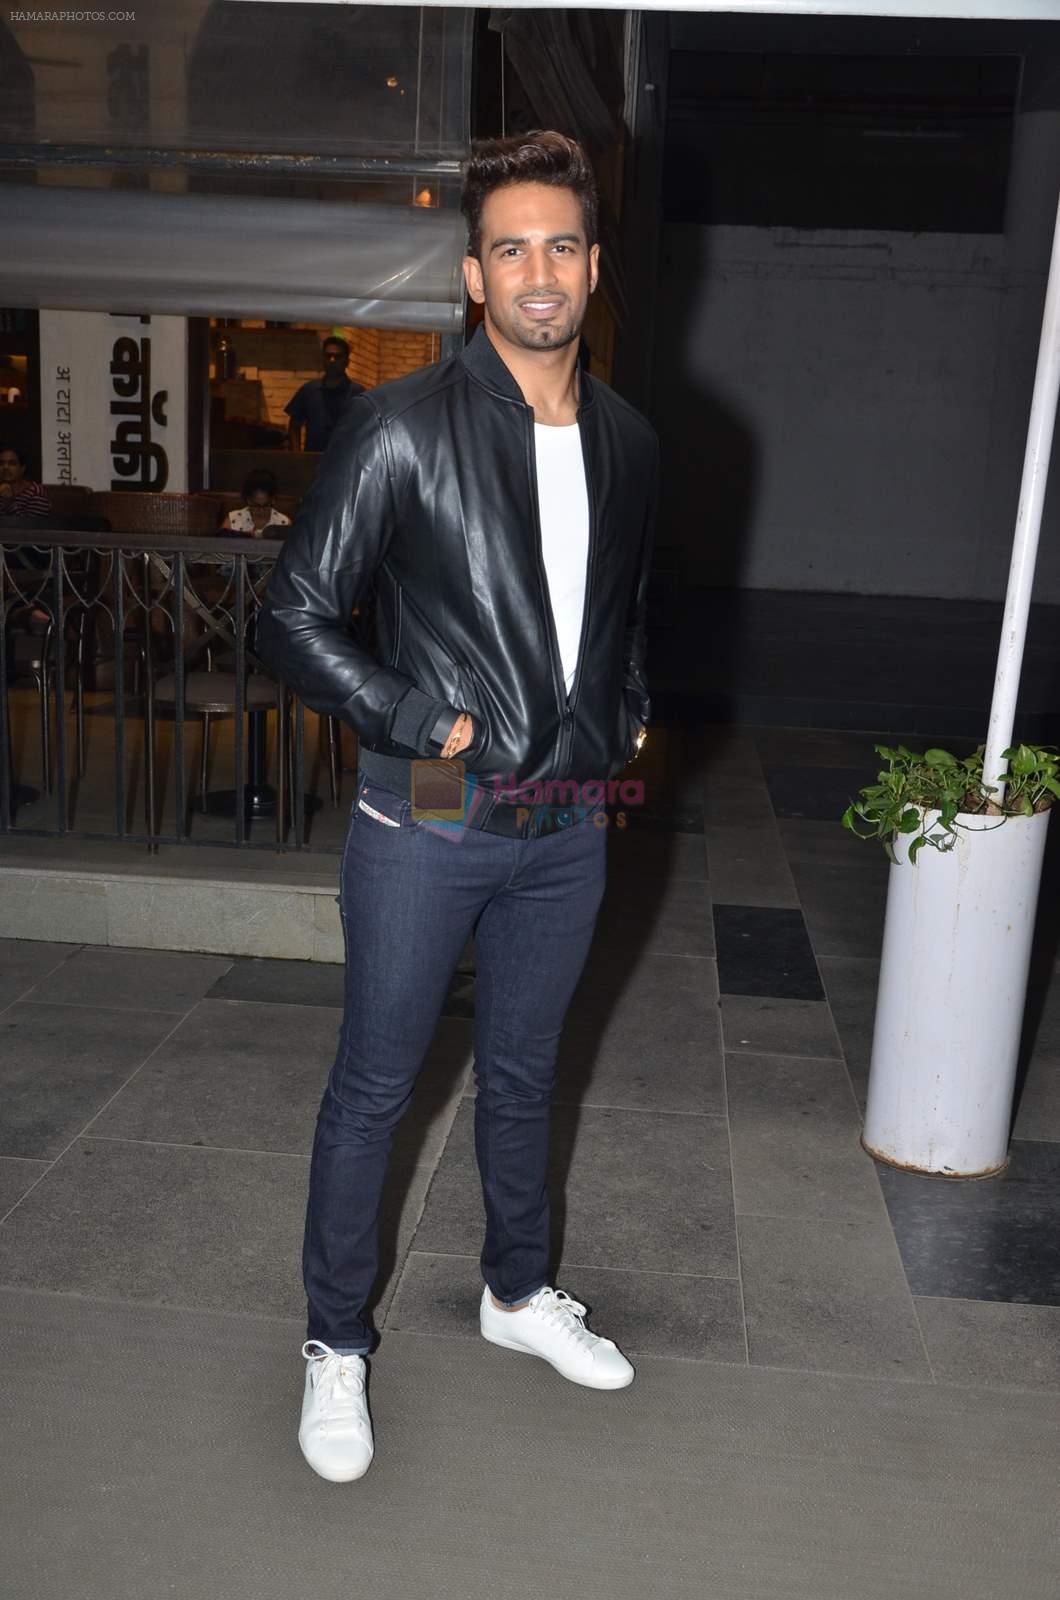 Upen Patel snapped as they watch All is Well in PVR on 20th Aug 2015